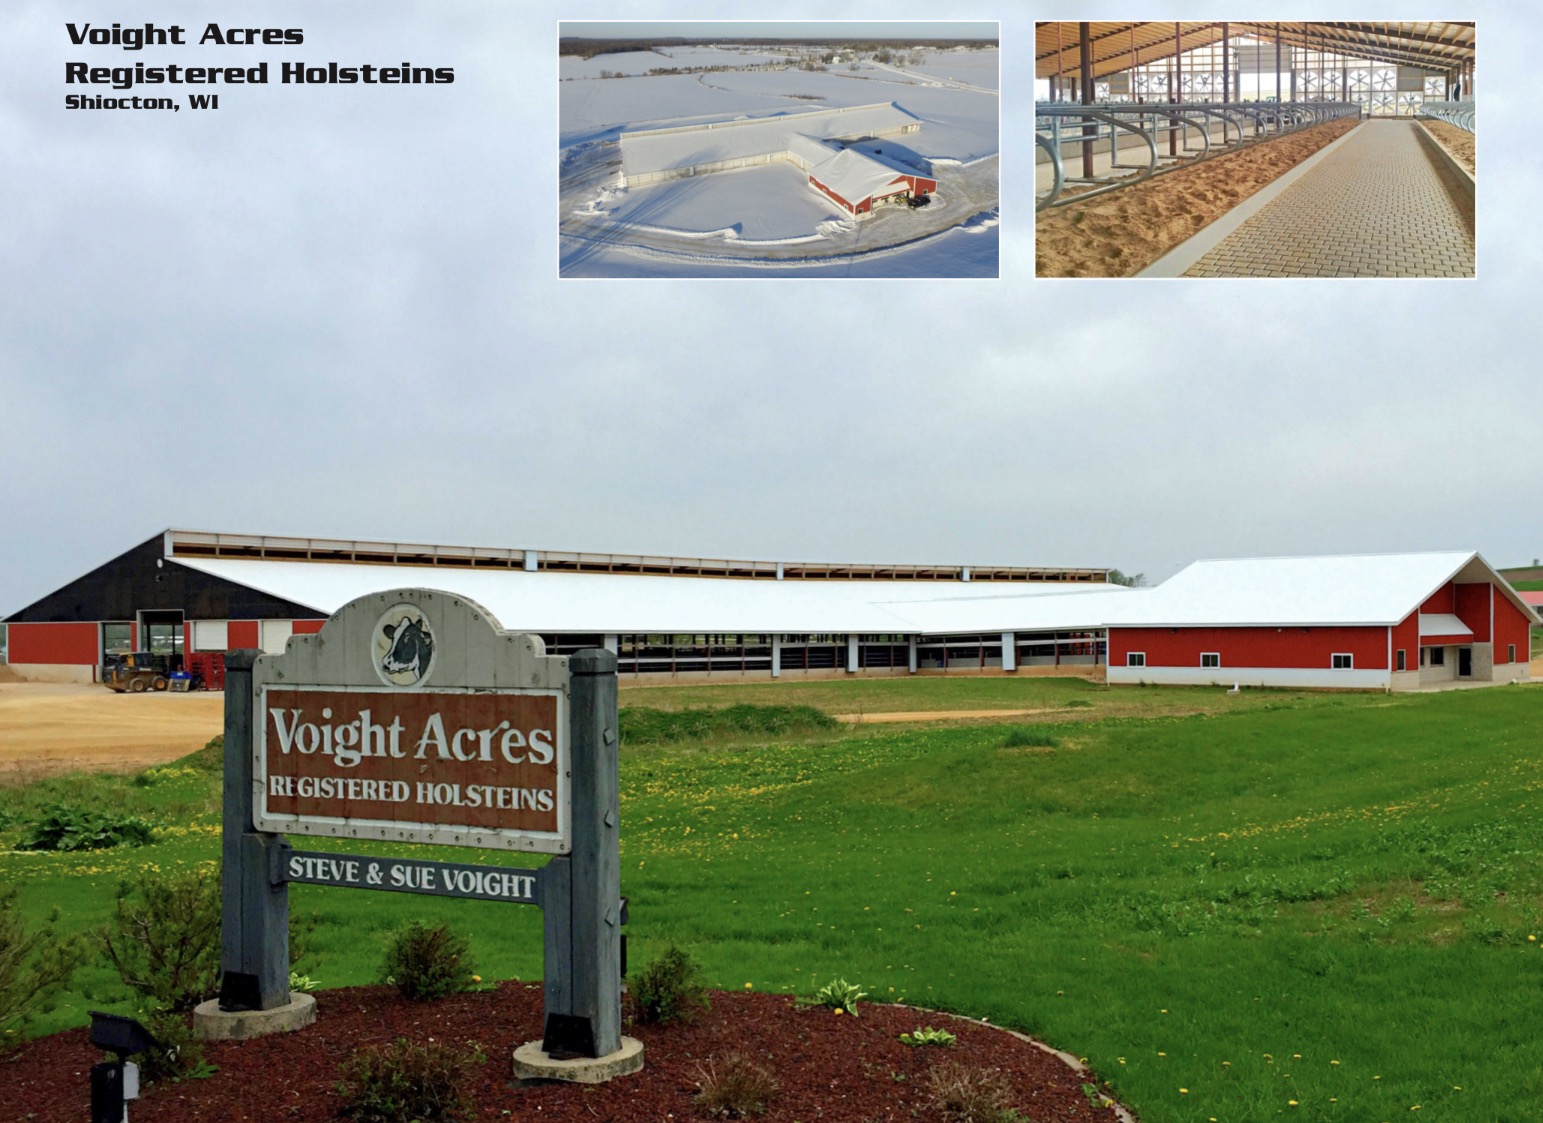 Agricultural Construction: Milking Parlor & Freestall Barn:  Voight Acres Registered Holsteins, Shiocton, WI